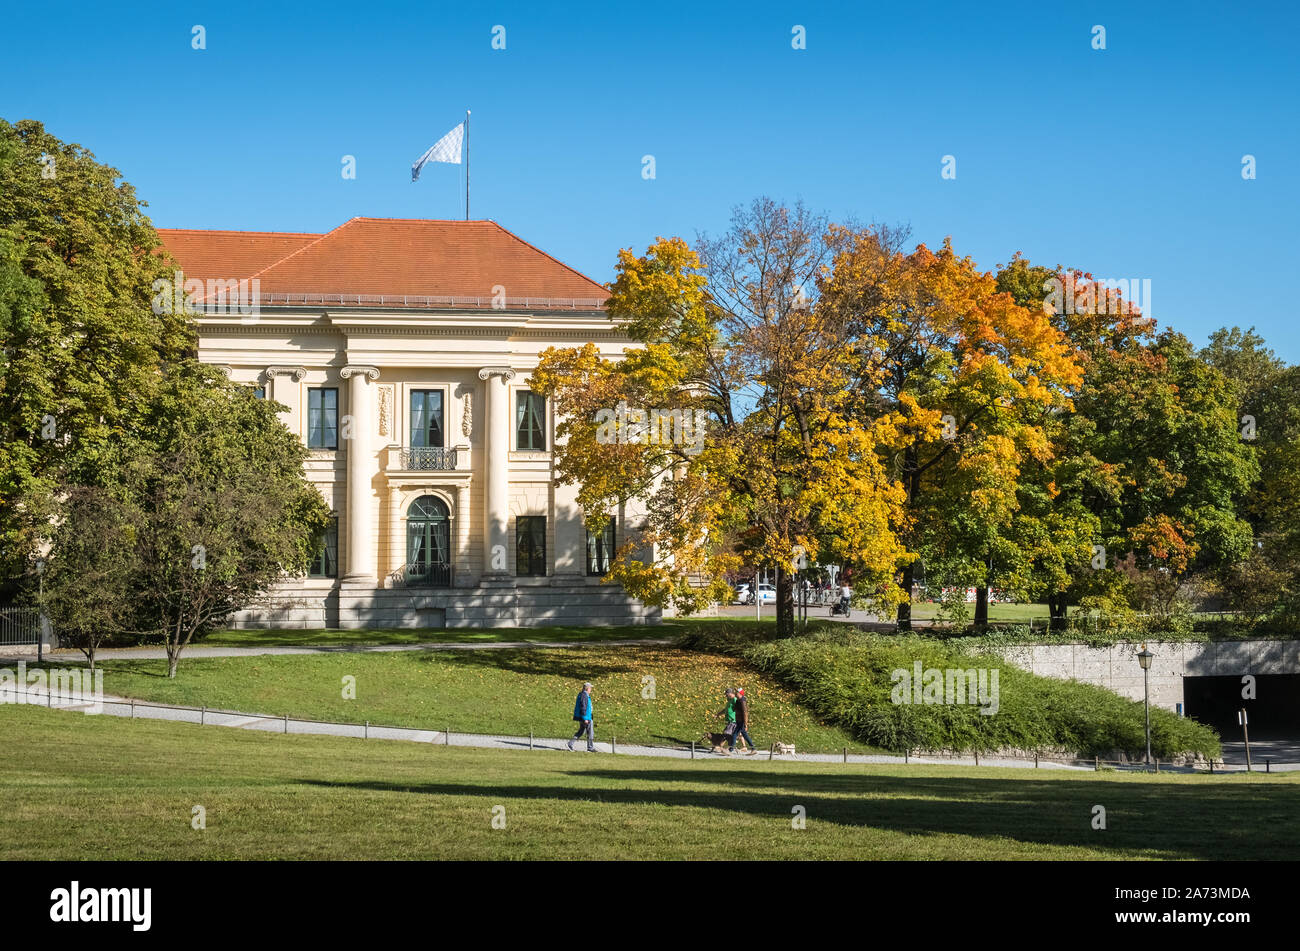 Munich, Bavaria, Germany. External view of Prinz-Carl-Palais, a mansion built in the style of early Neoclassicism, also known as Palais Salabert. Stock Photo